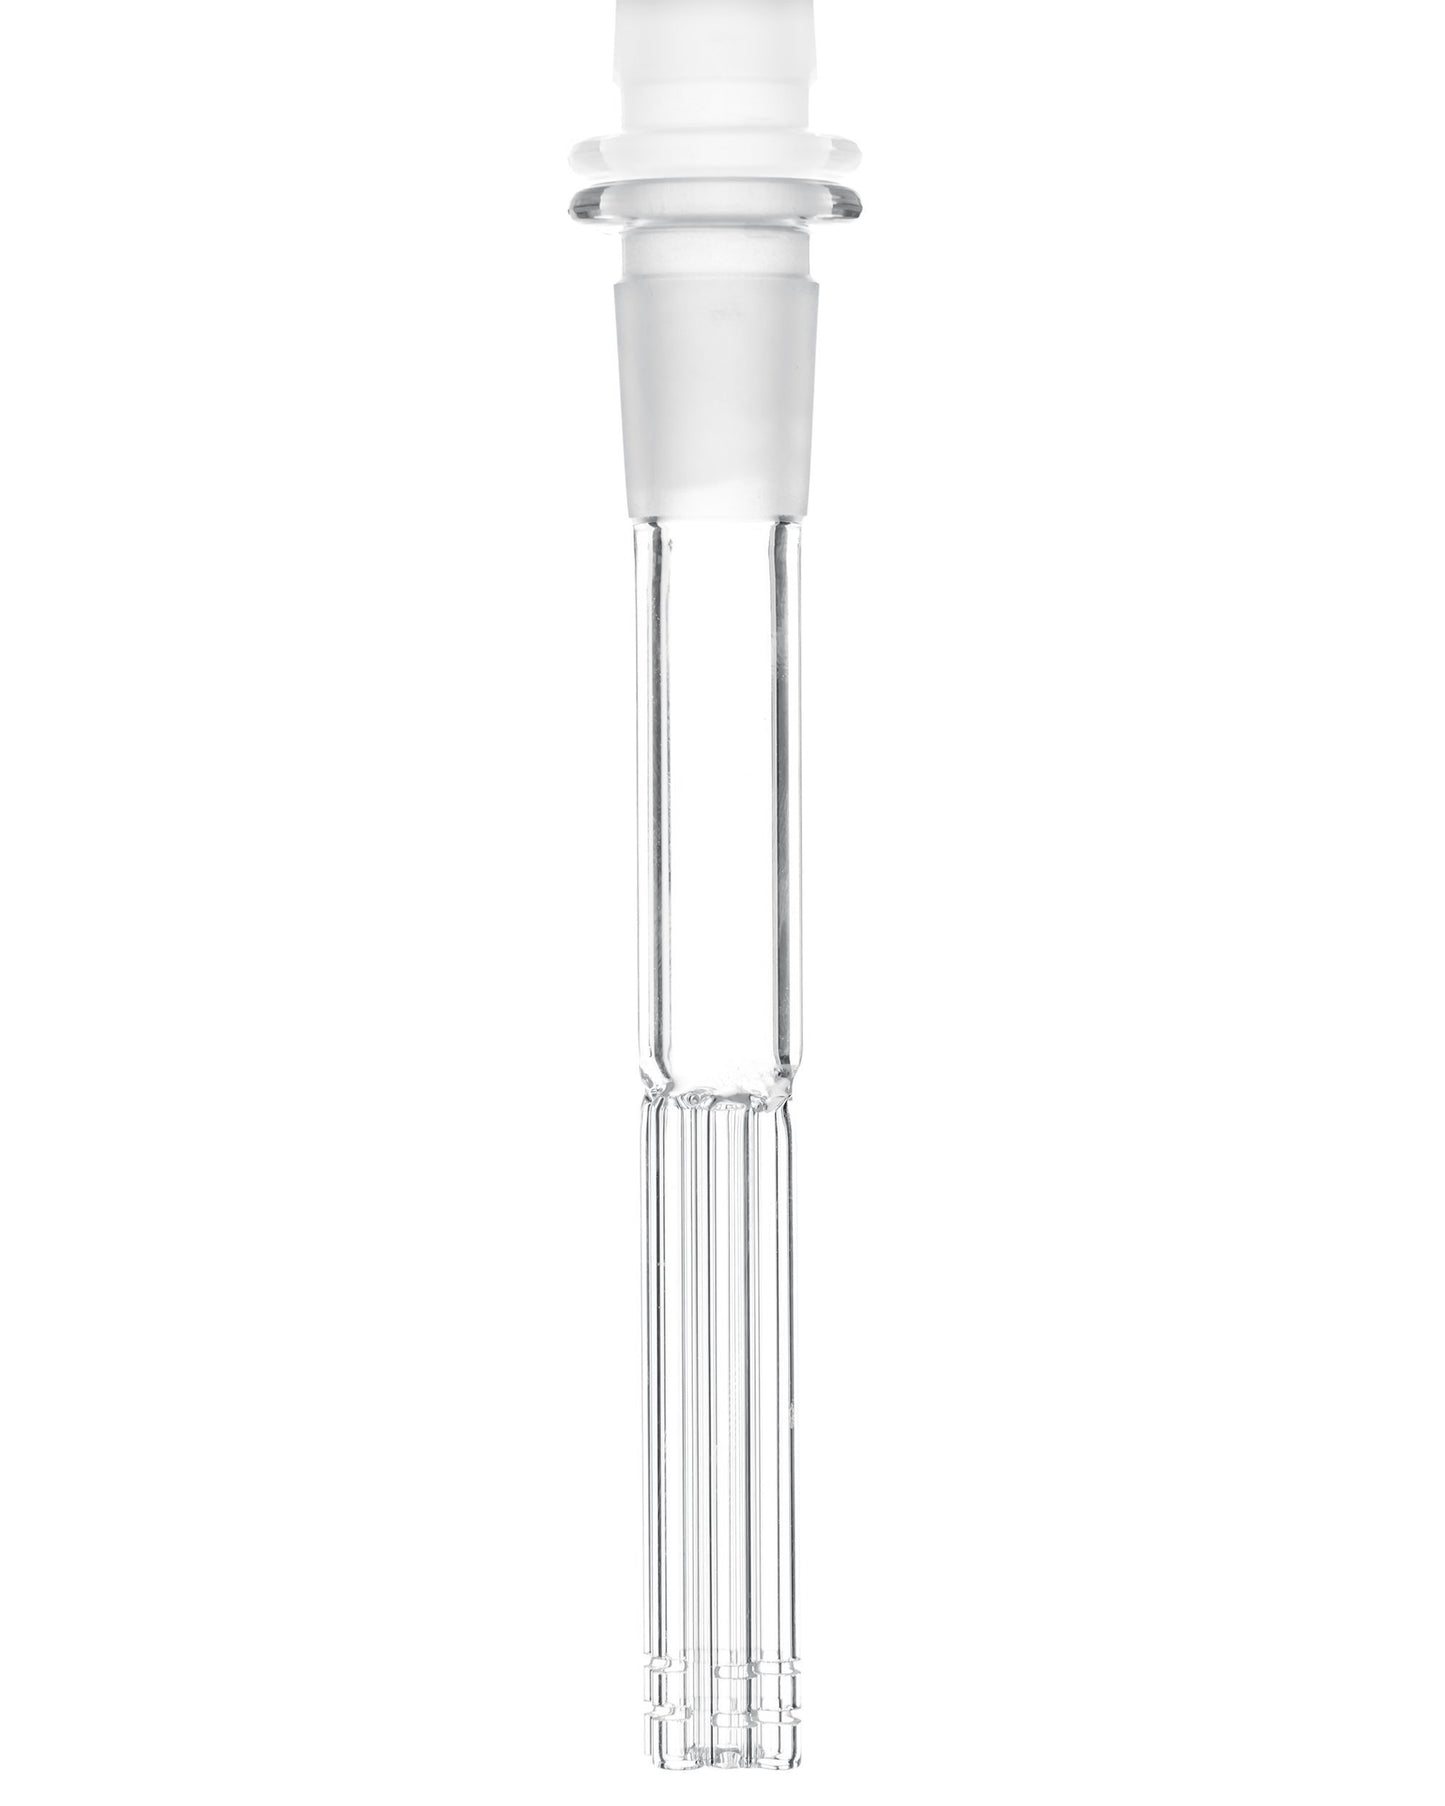 Downstem with Tree Perc at Flower Power Packages